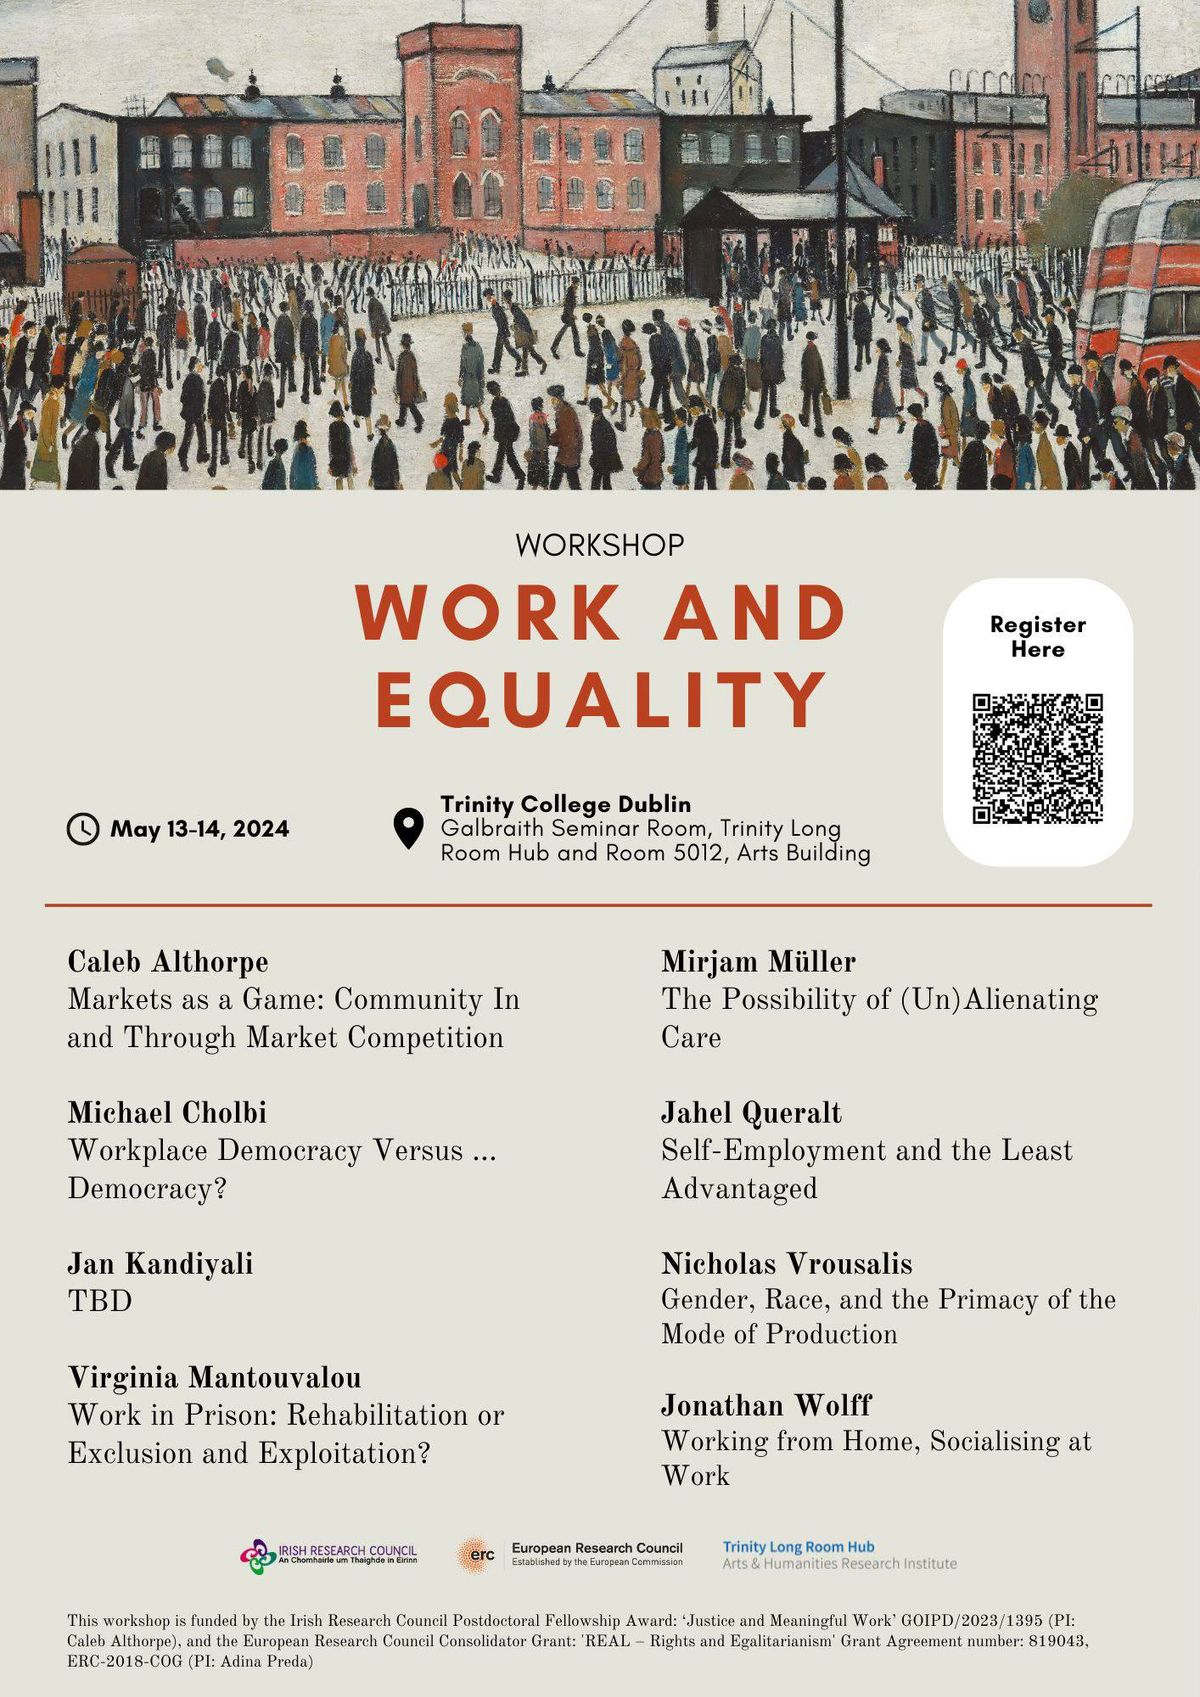 'Work and equality' workshop